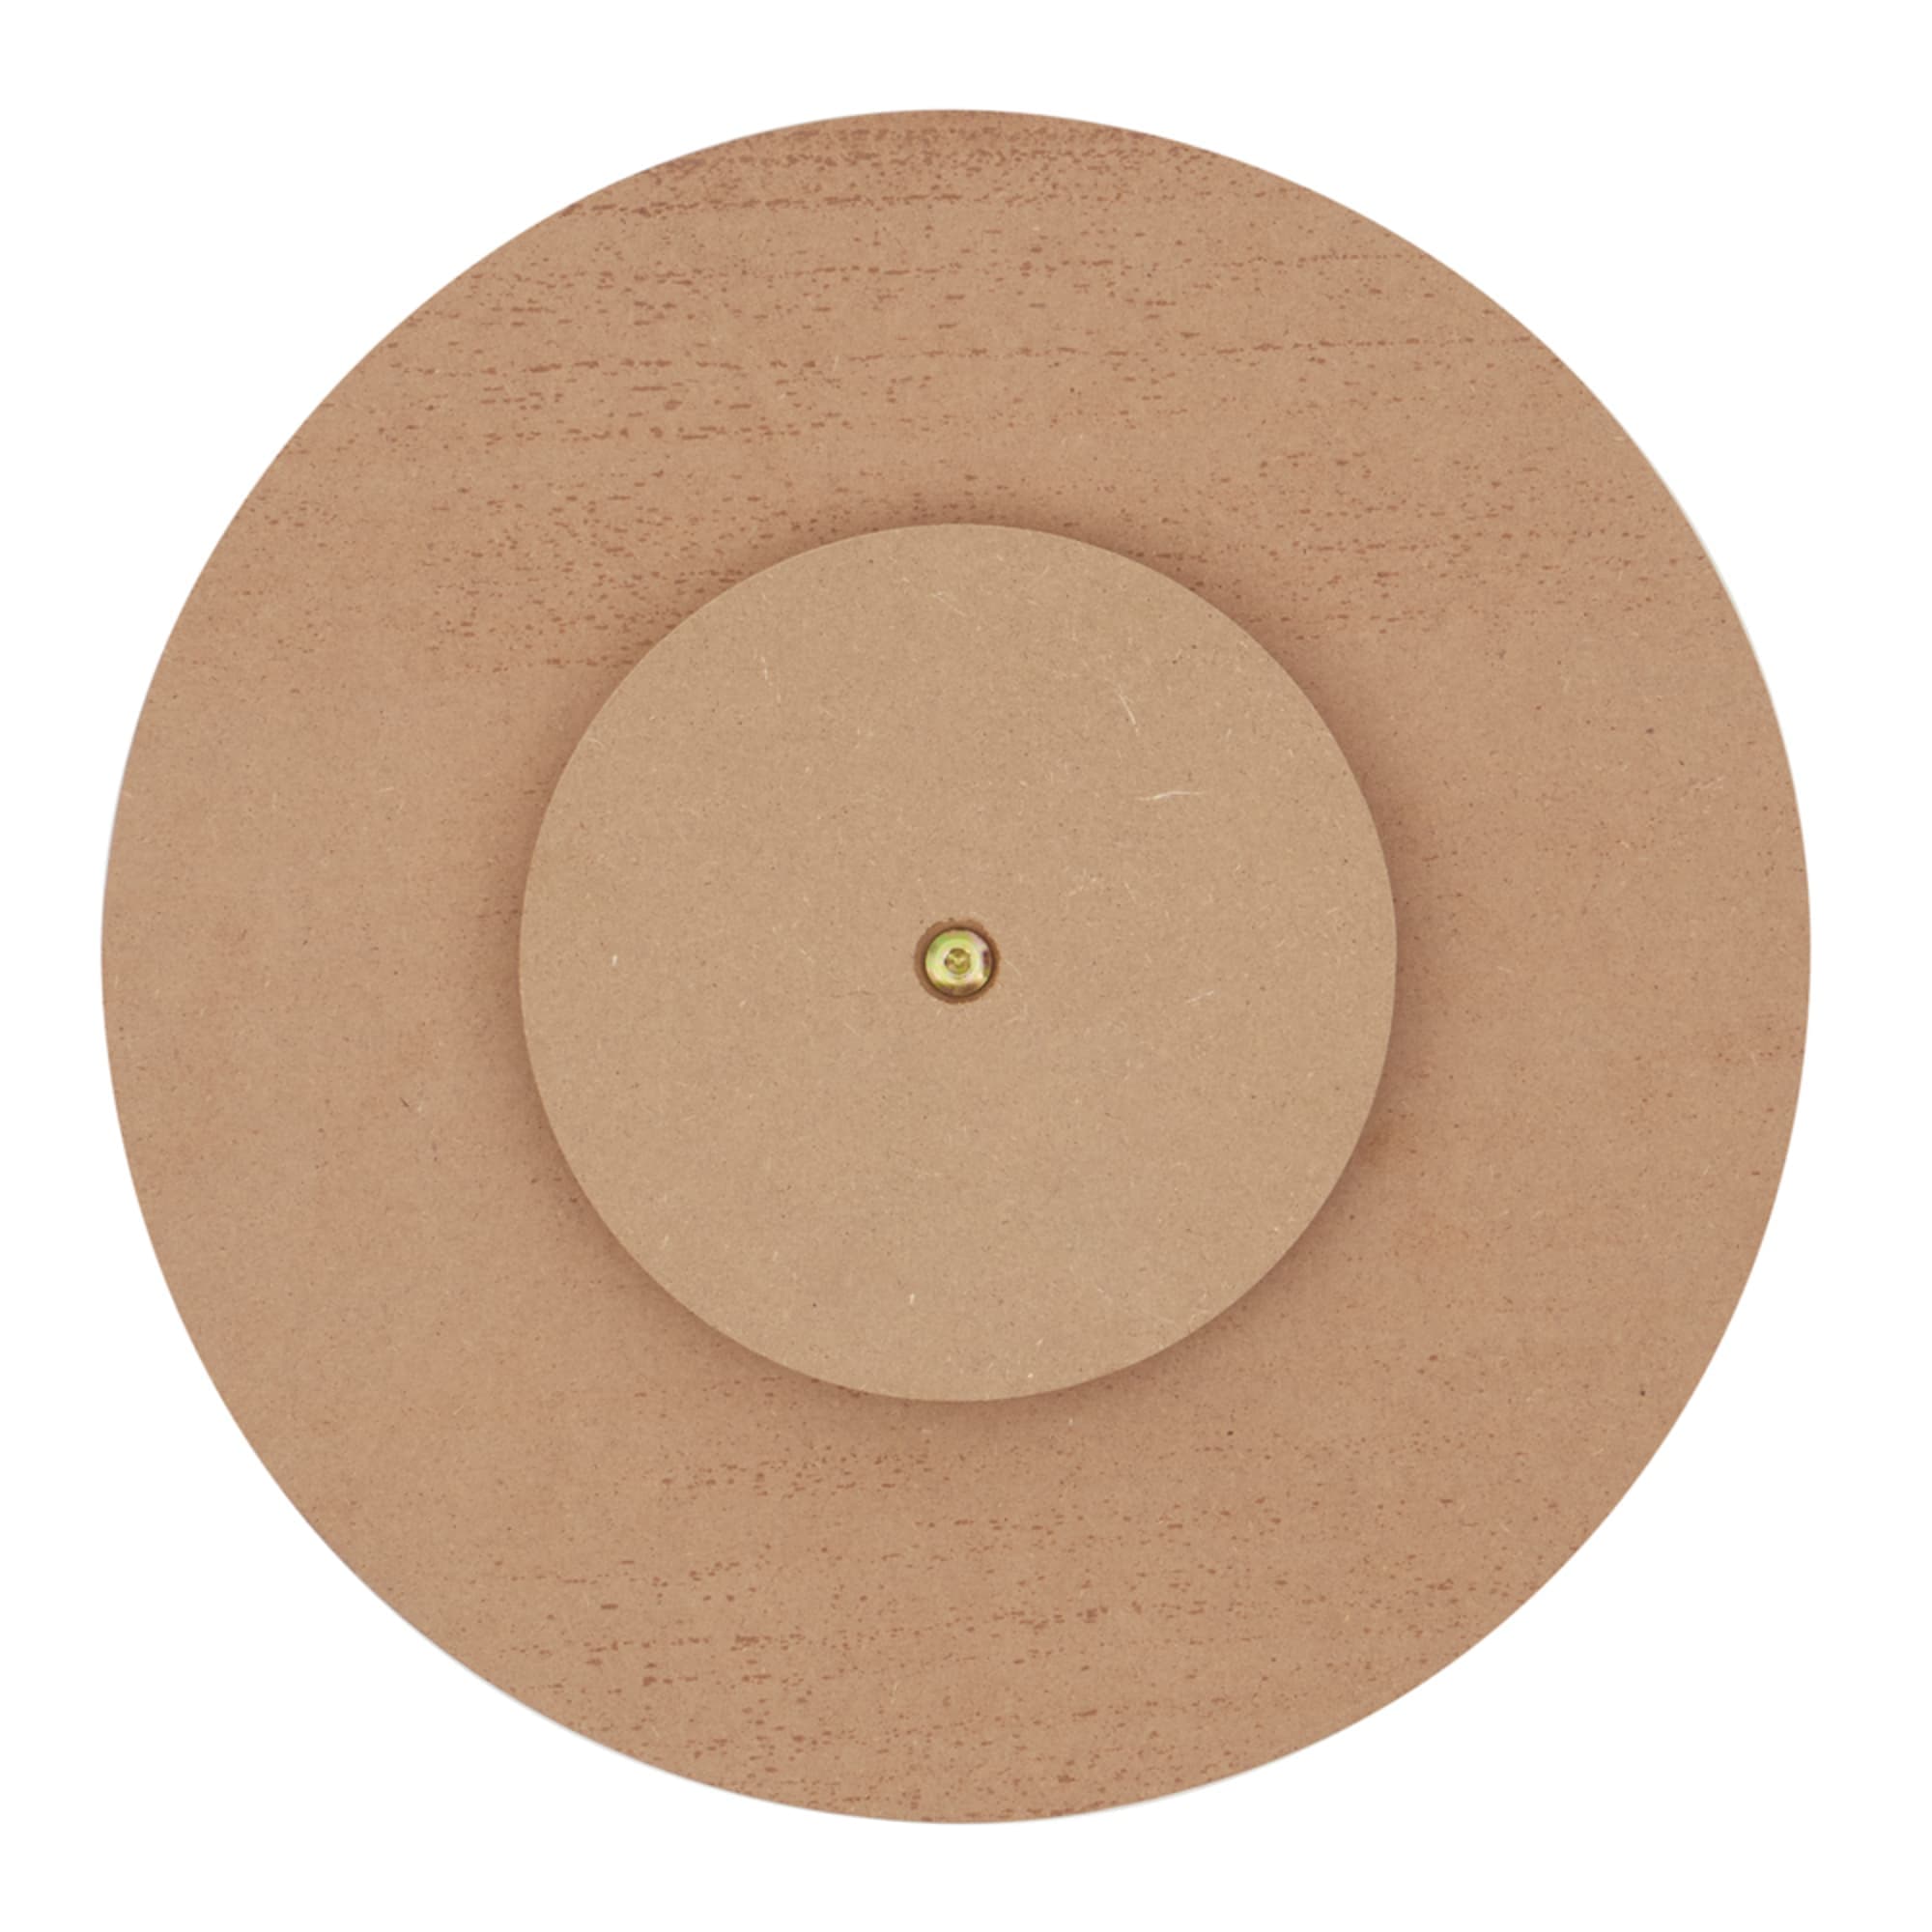 Home Basics Farmhouse Graphic Print Wood Lazy Susan, Natural $12.00 EACH, CASE PACK OF 12